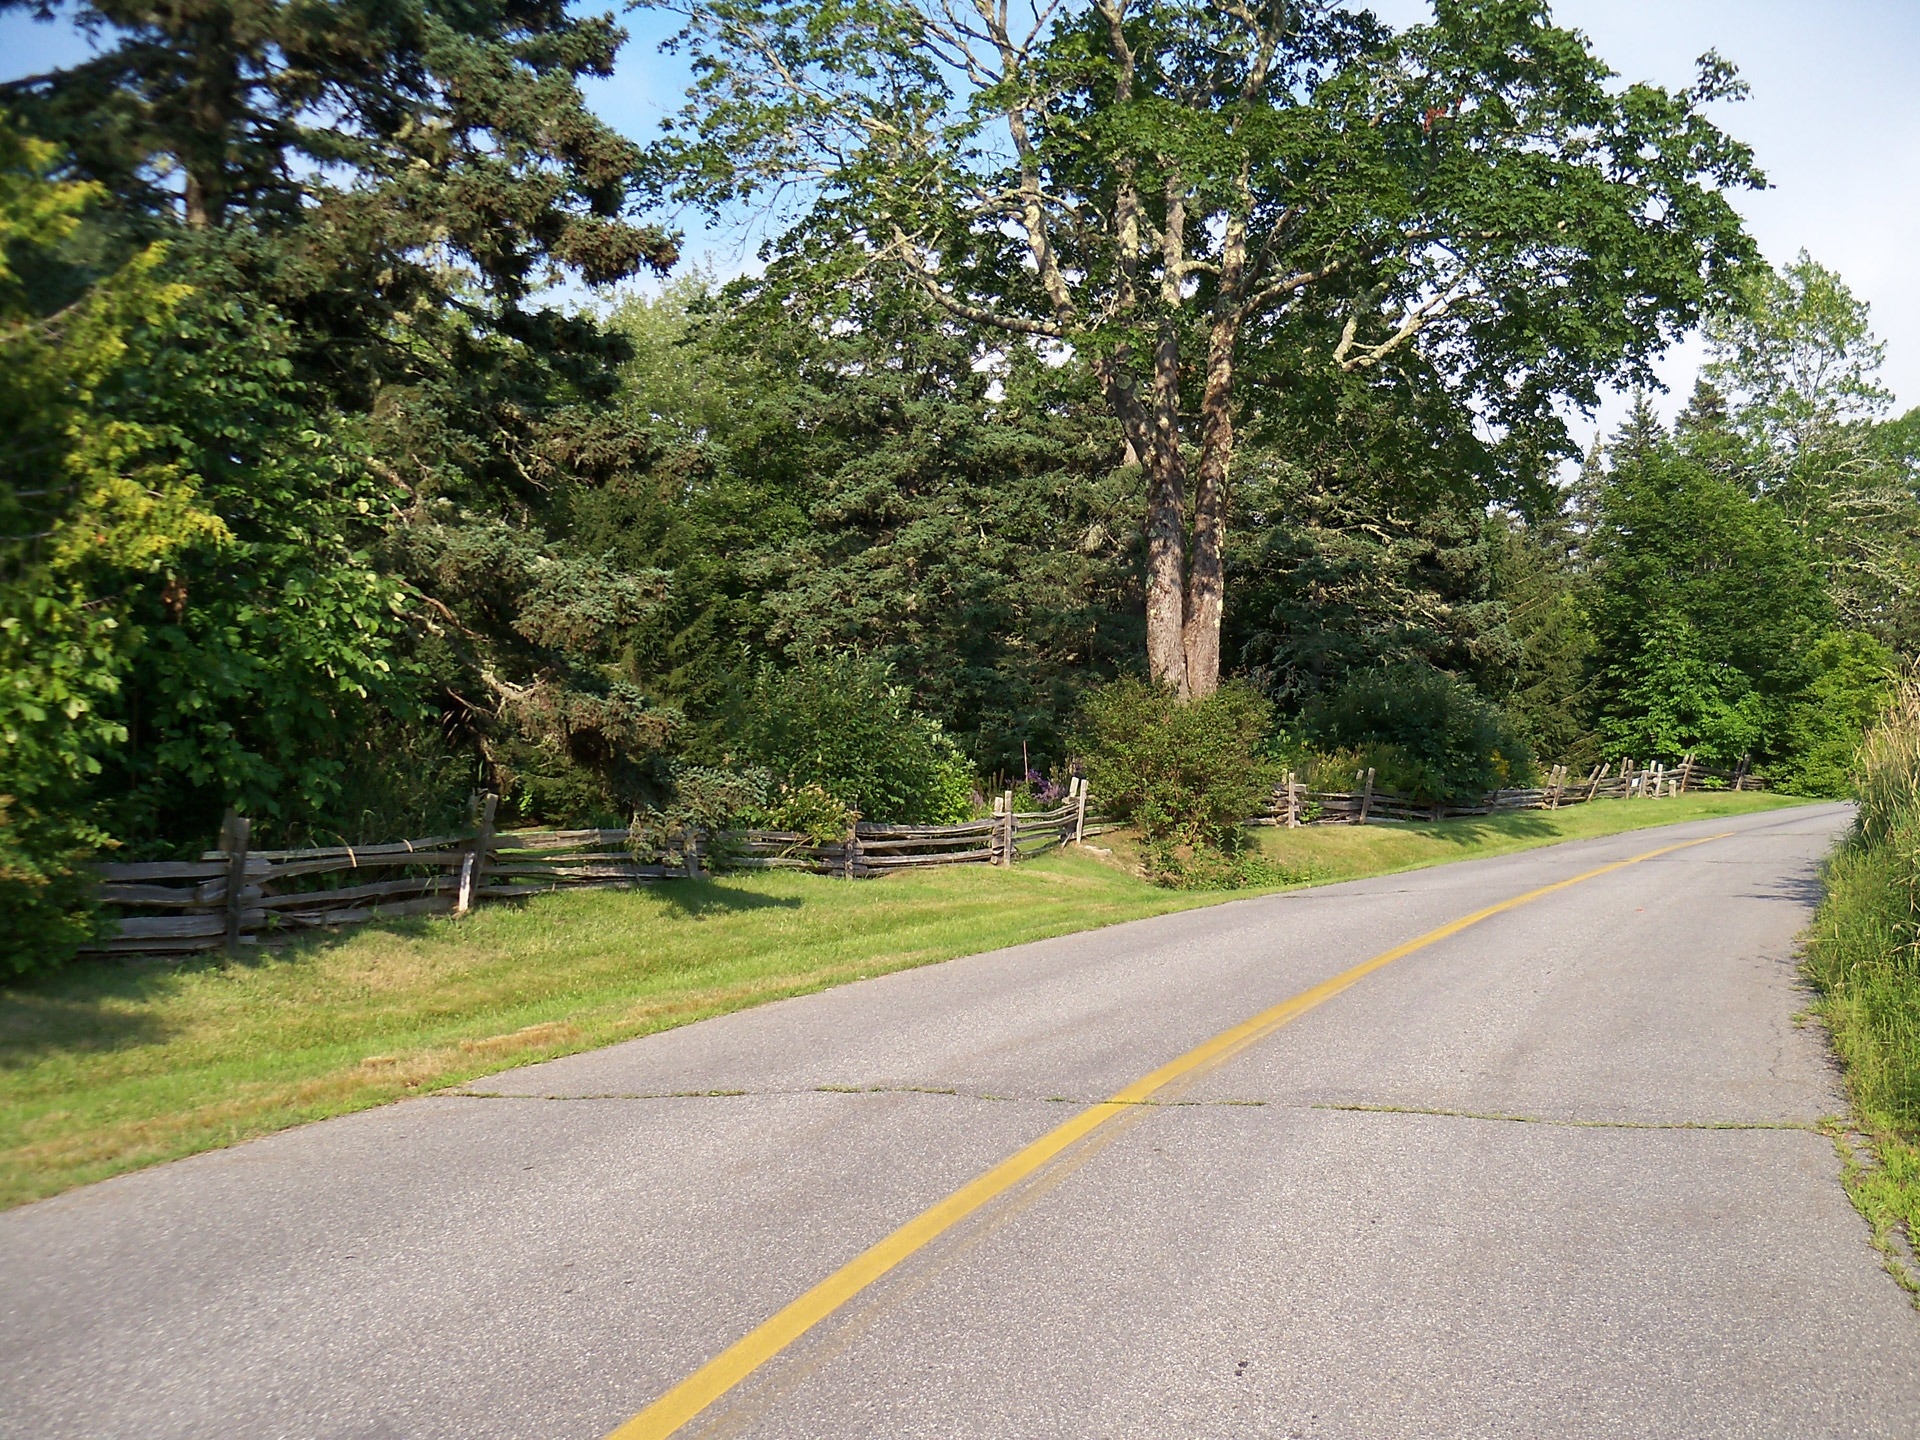 grey concrete road with yellow center line between green trees